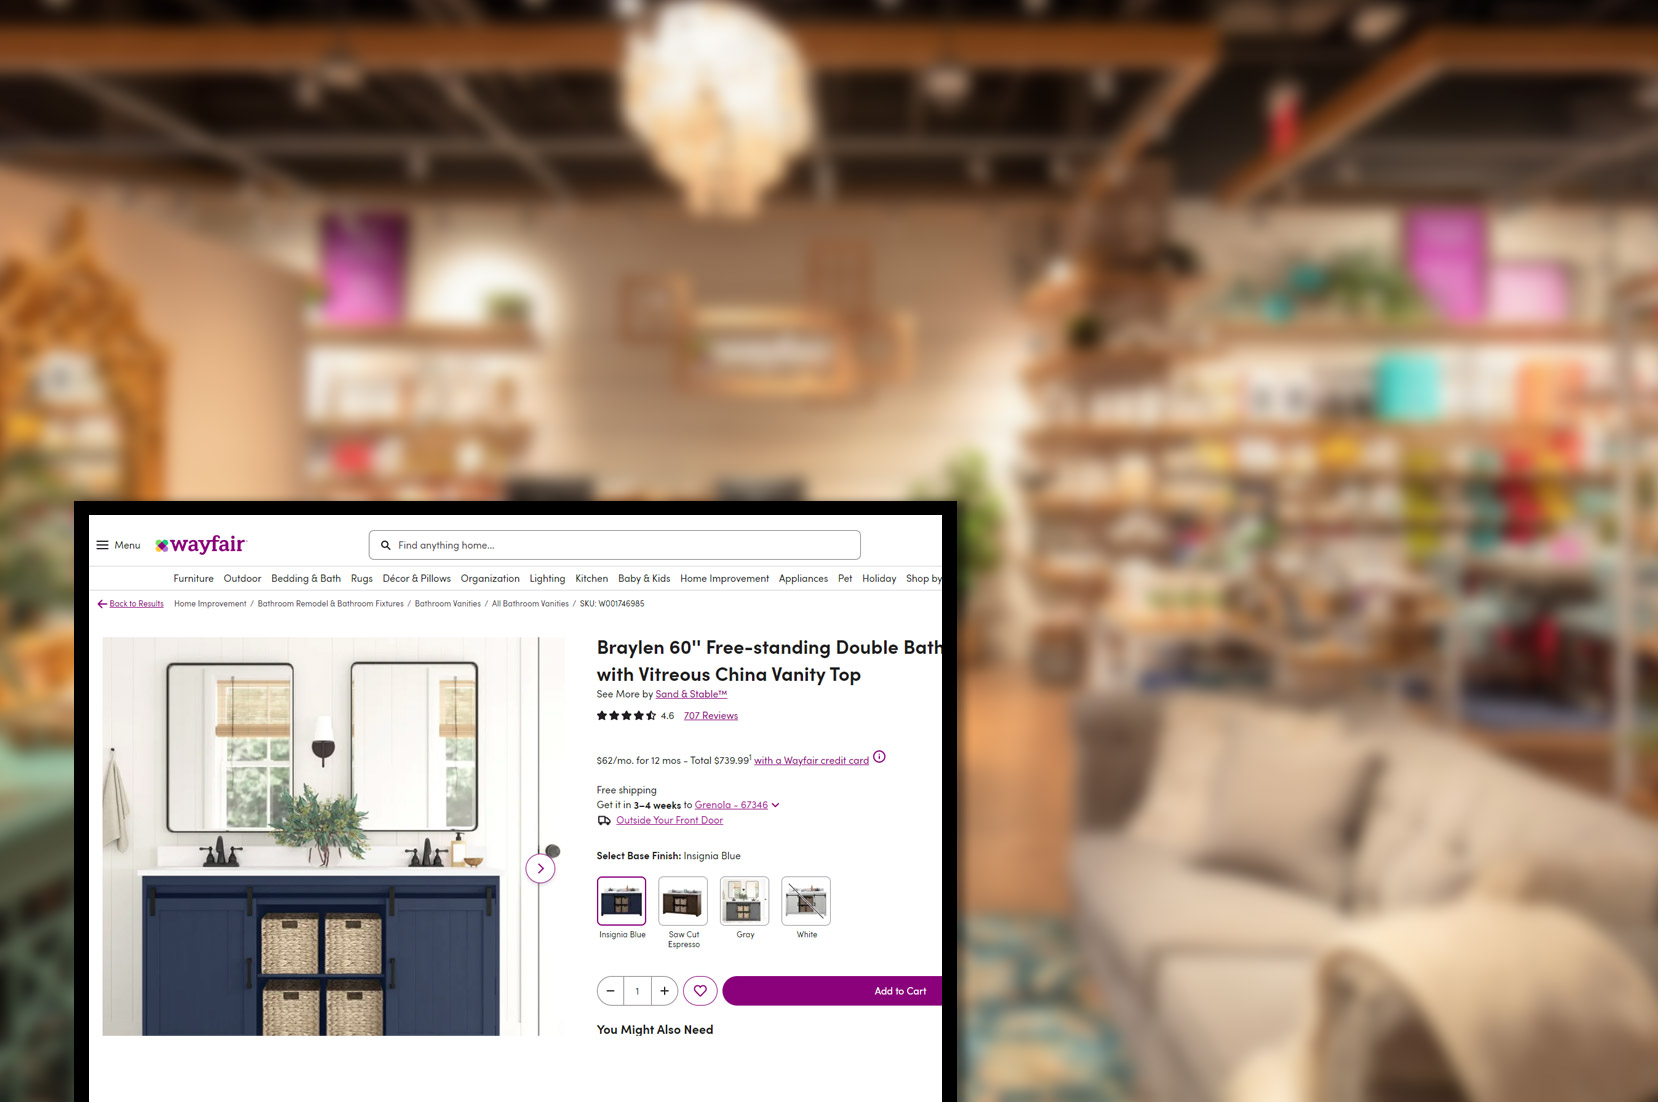 wayfair-comproduct-pricing-information-and-image-scraping-services